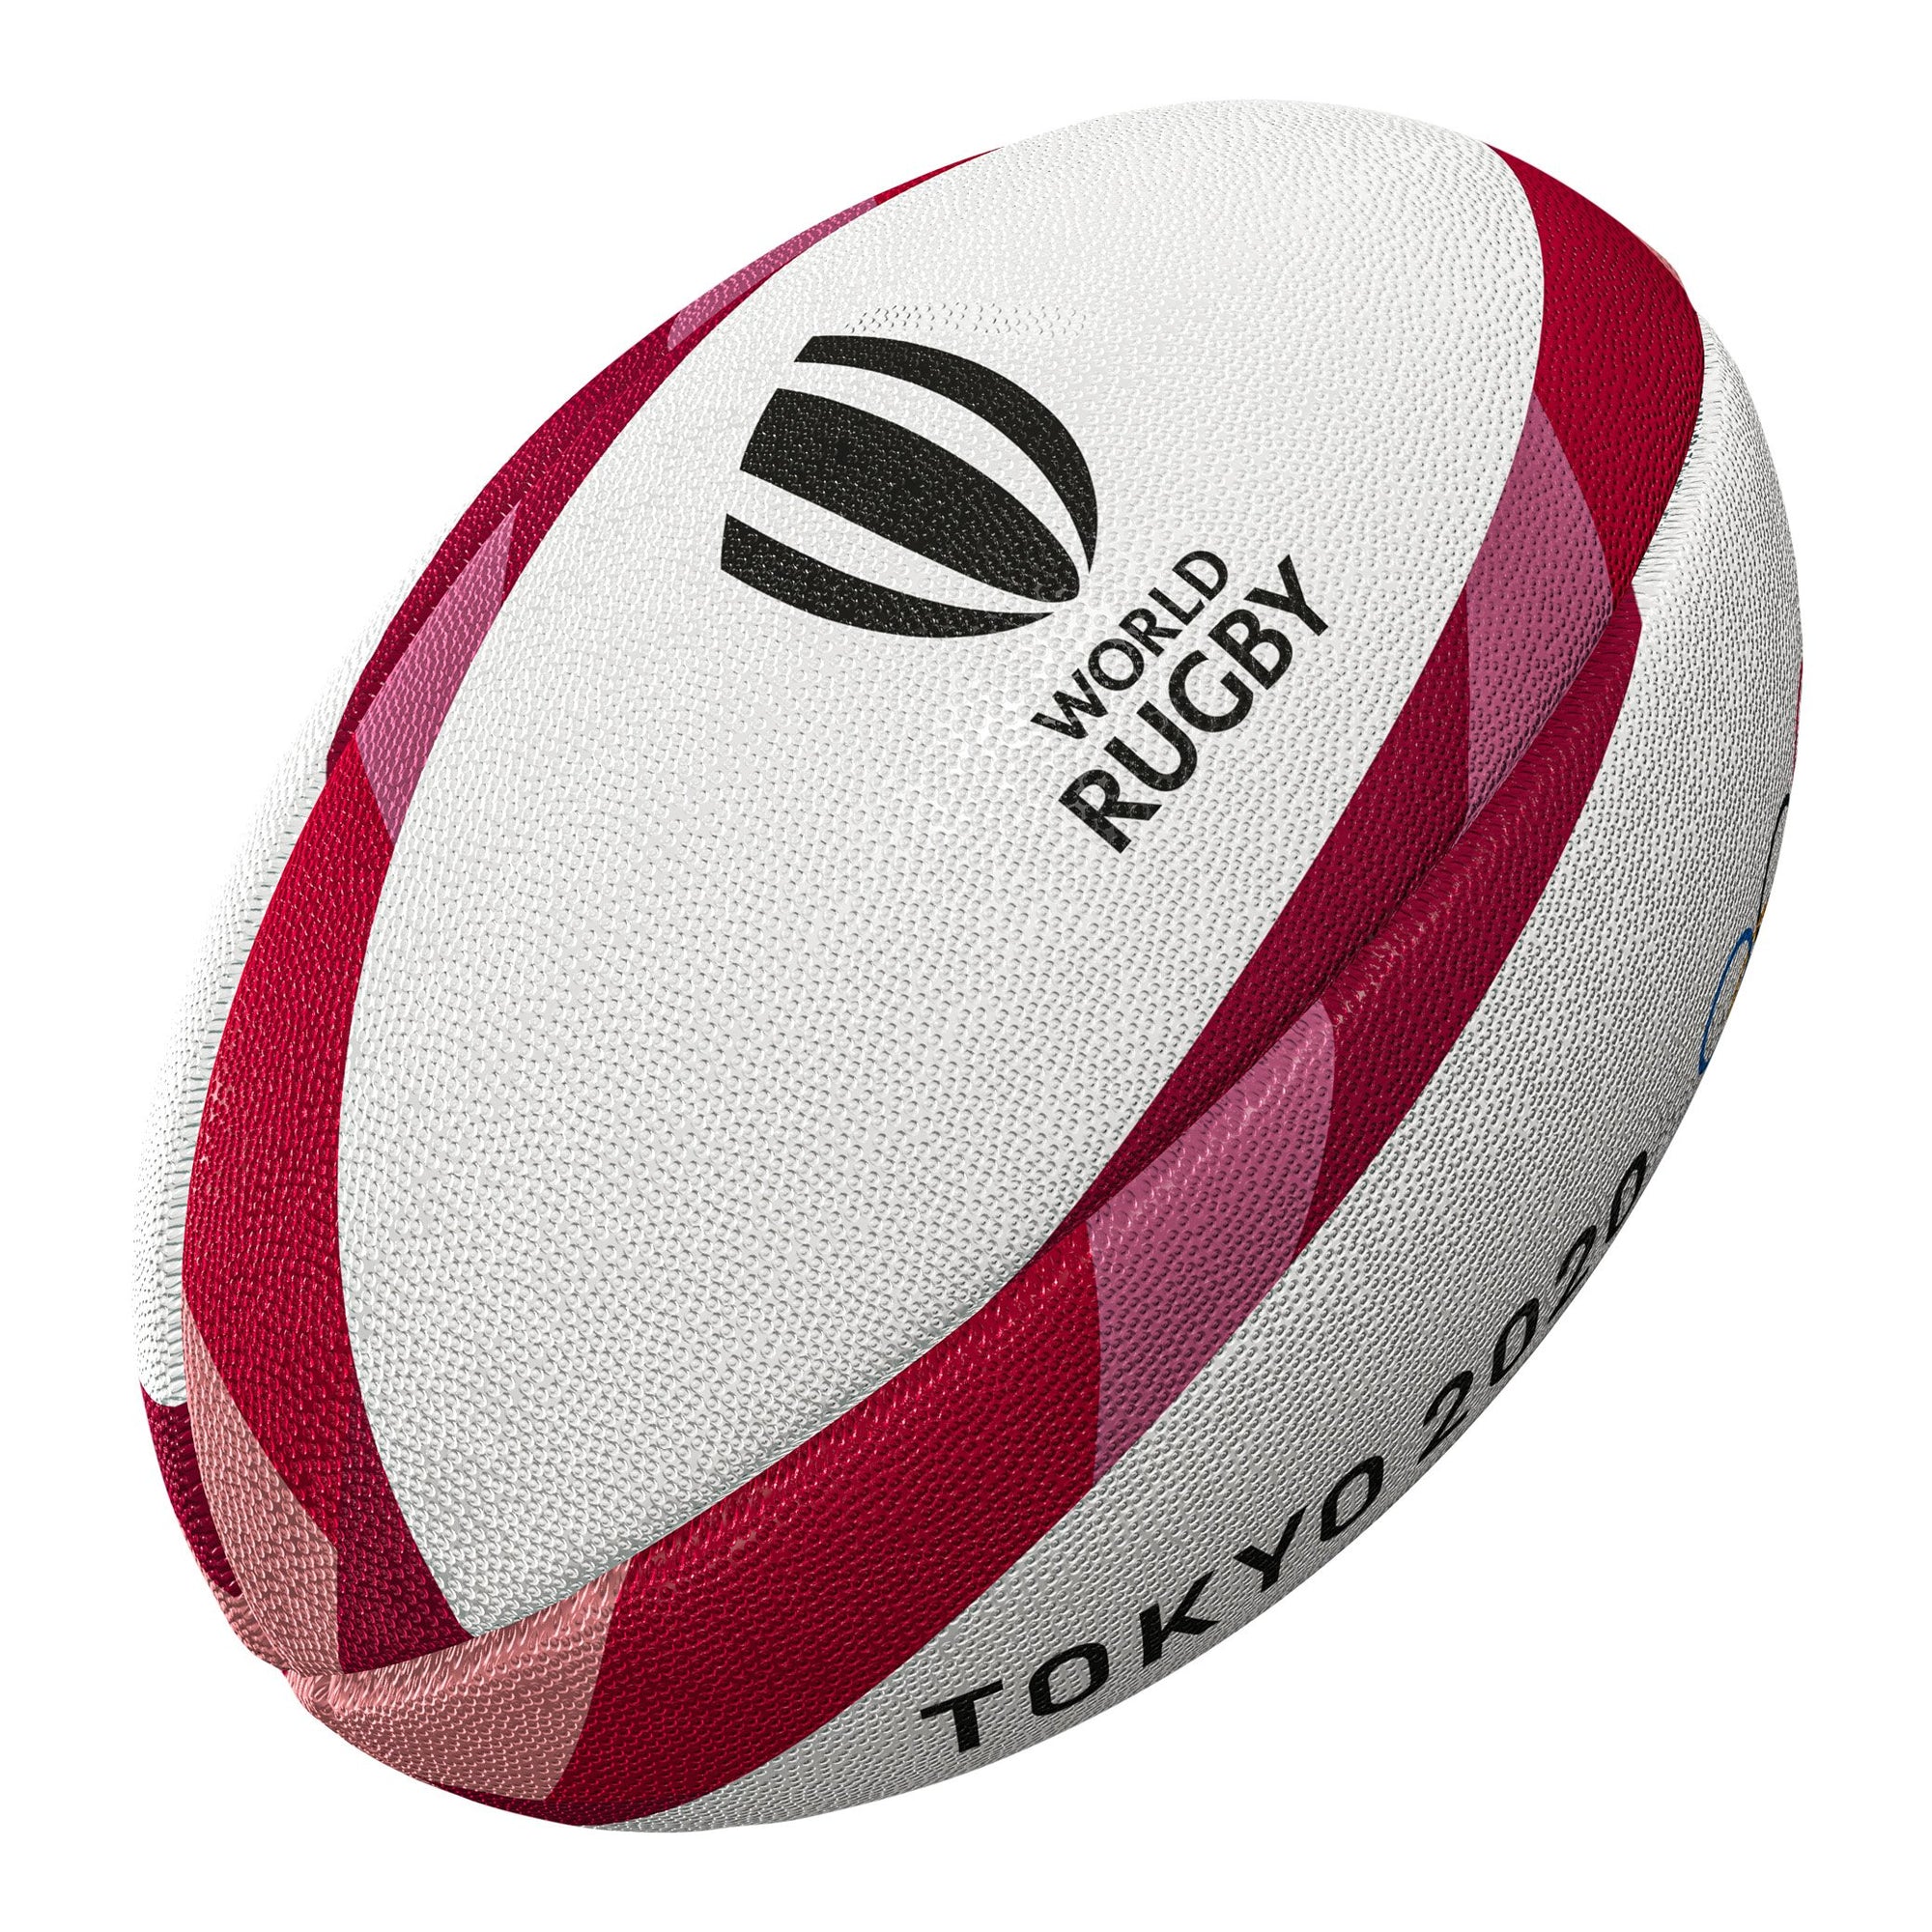 Rugby Imports Gilbert Tokyo Olympics Replica Rugby Ball